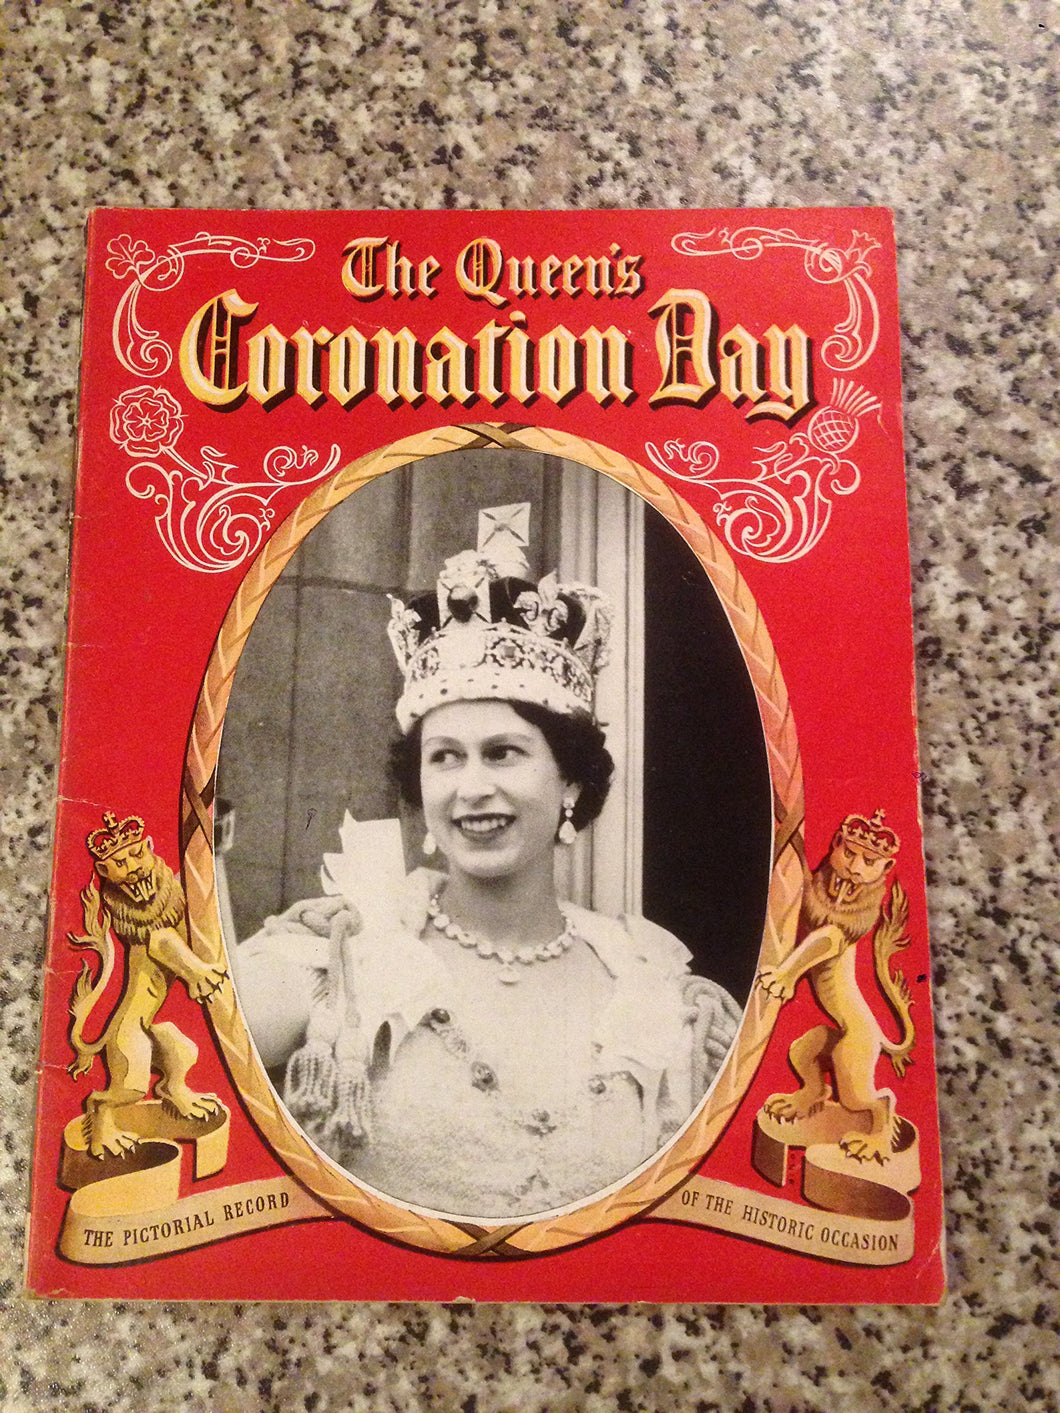 The Queen's Coronation Day: The Pictorial Record of the Great Occasion [Paperback] Nichols, Beverley.